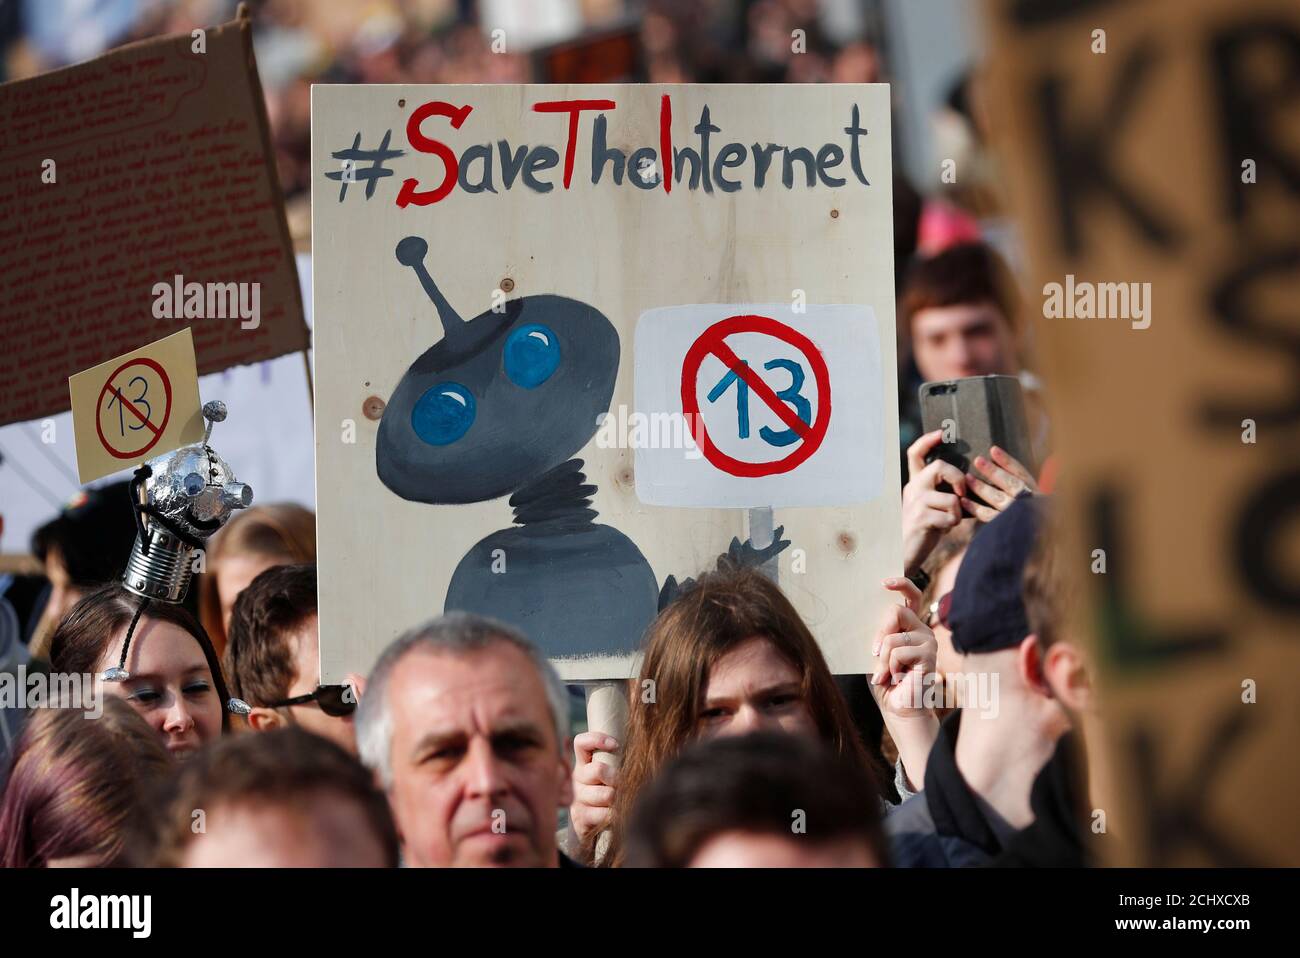 People protest against the planned EU copyright reform in Berlin, Germany March 23, 2019. REUTERS/Hannibal Hanschke Stock Photo